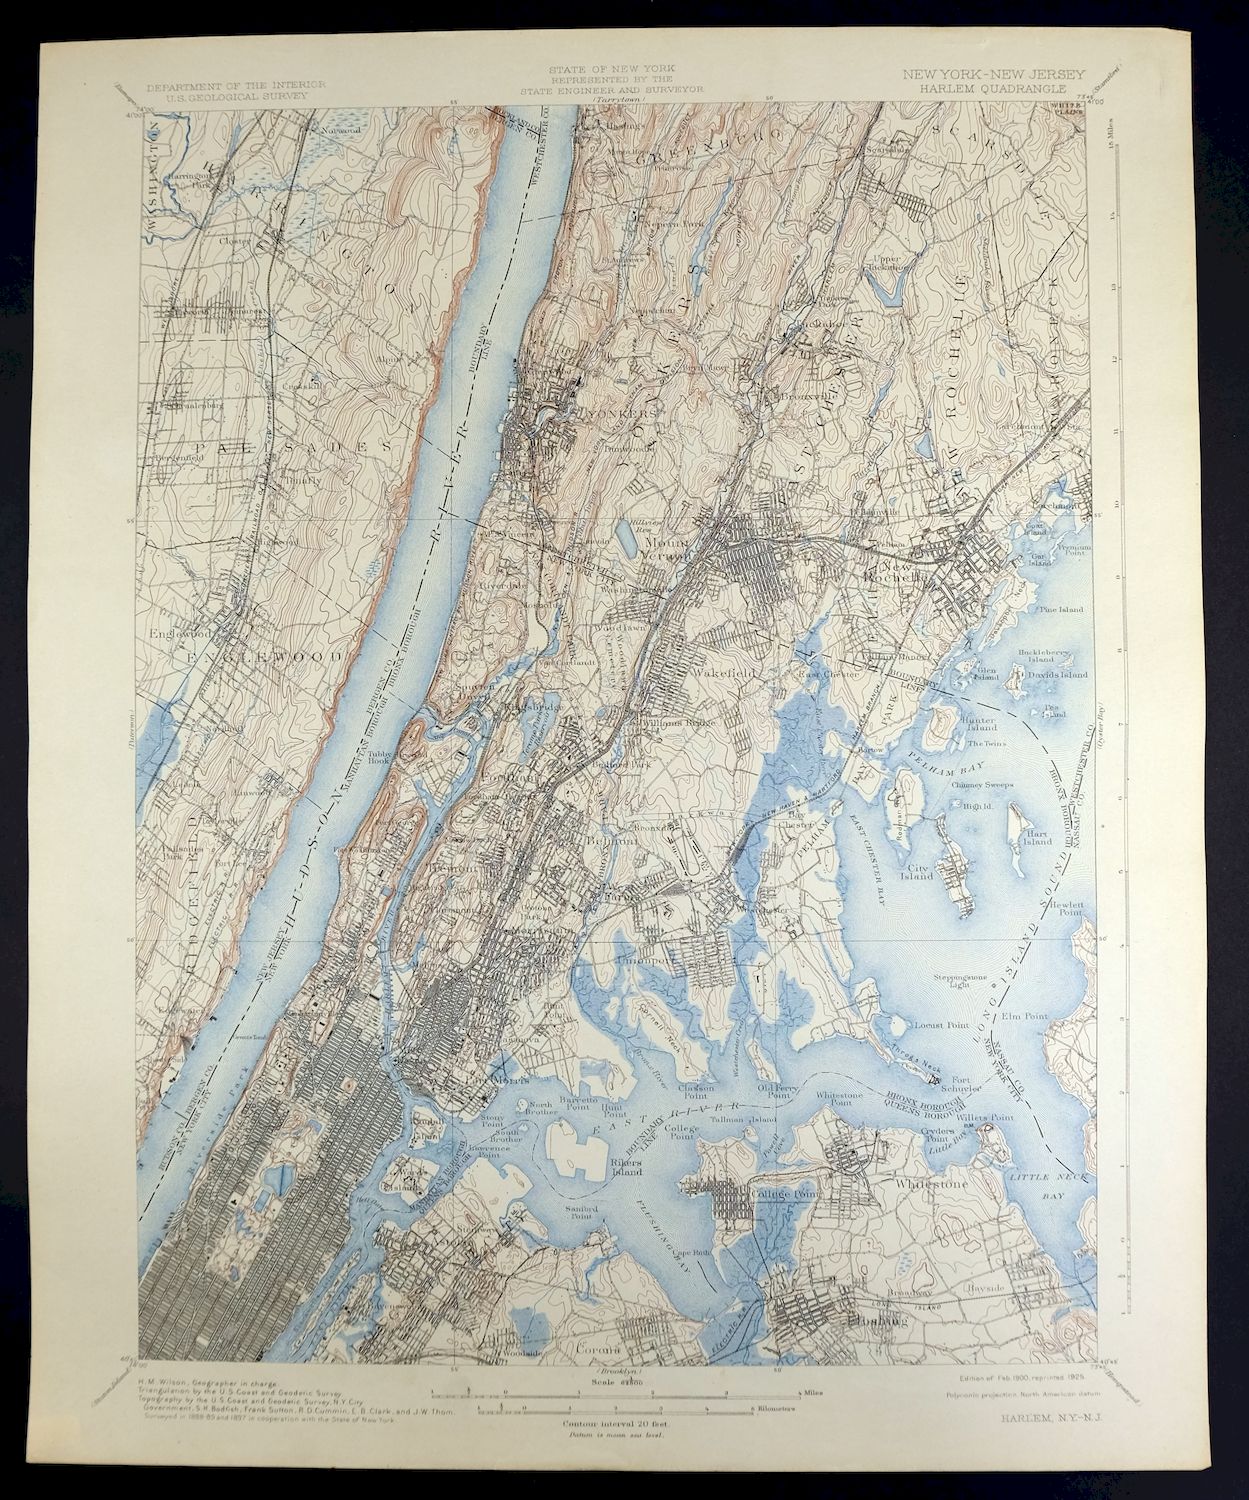 1:31680 Scale YellowMaps Central Square NY topo map Historical 1943 21.9 x 16.9 in 7.5 X 7.5 Minute